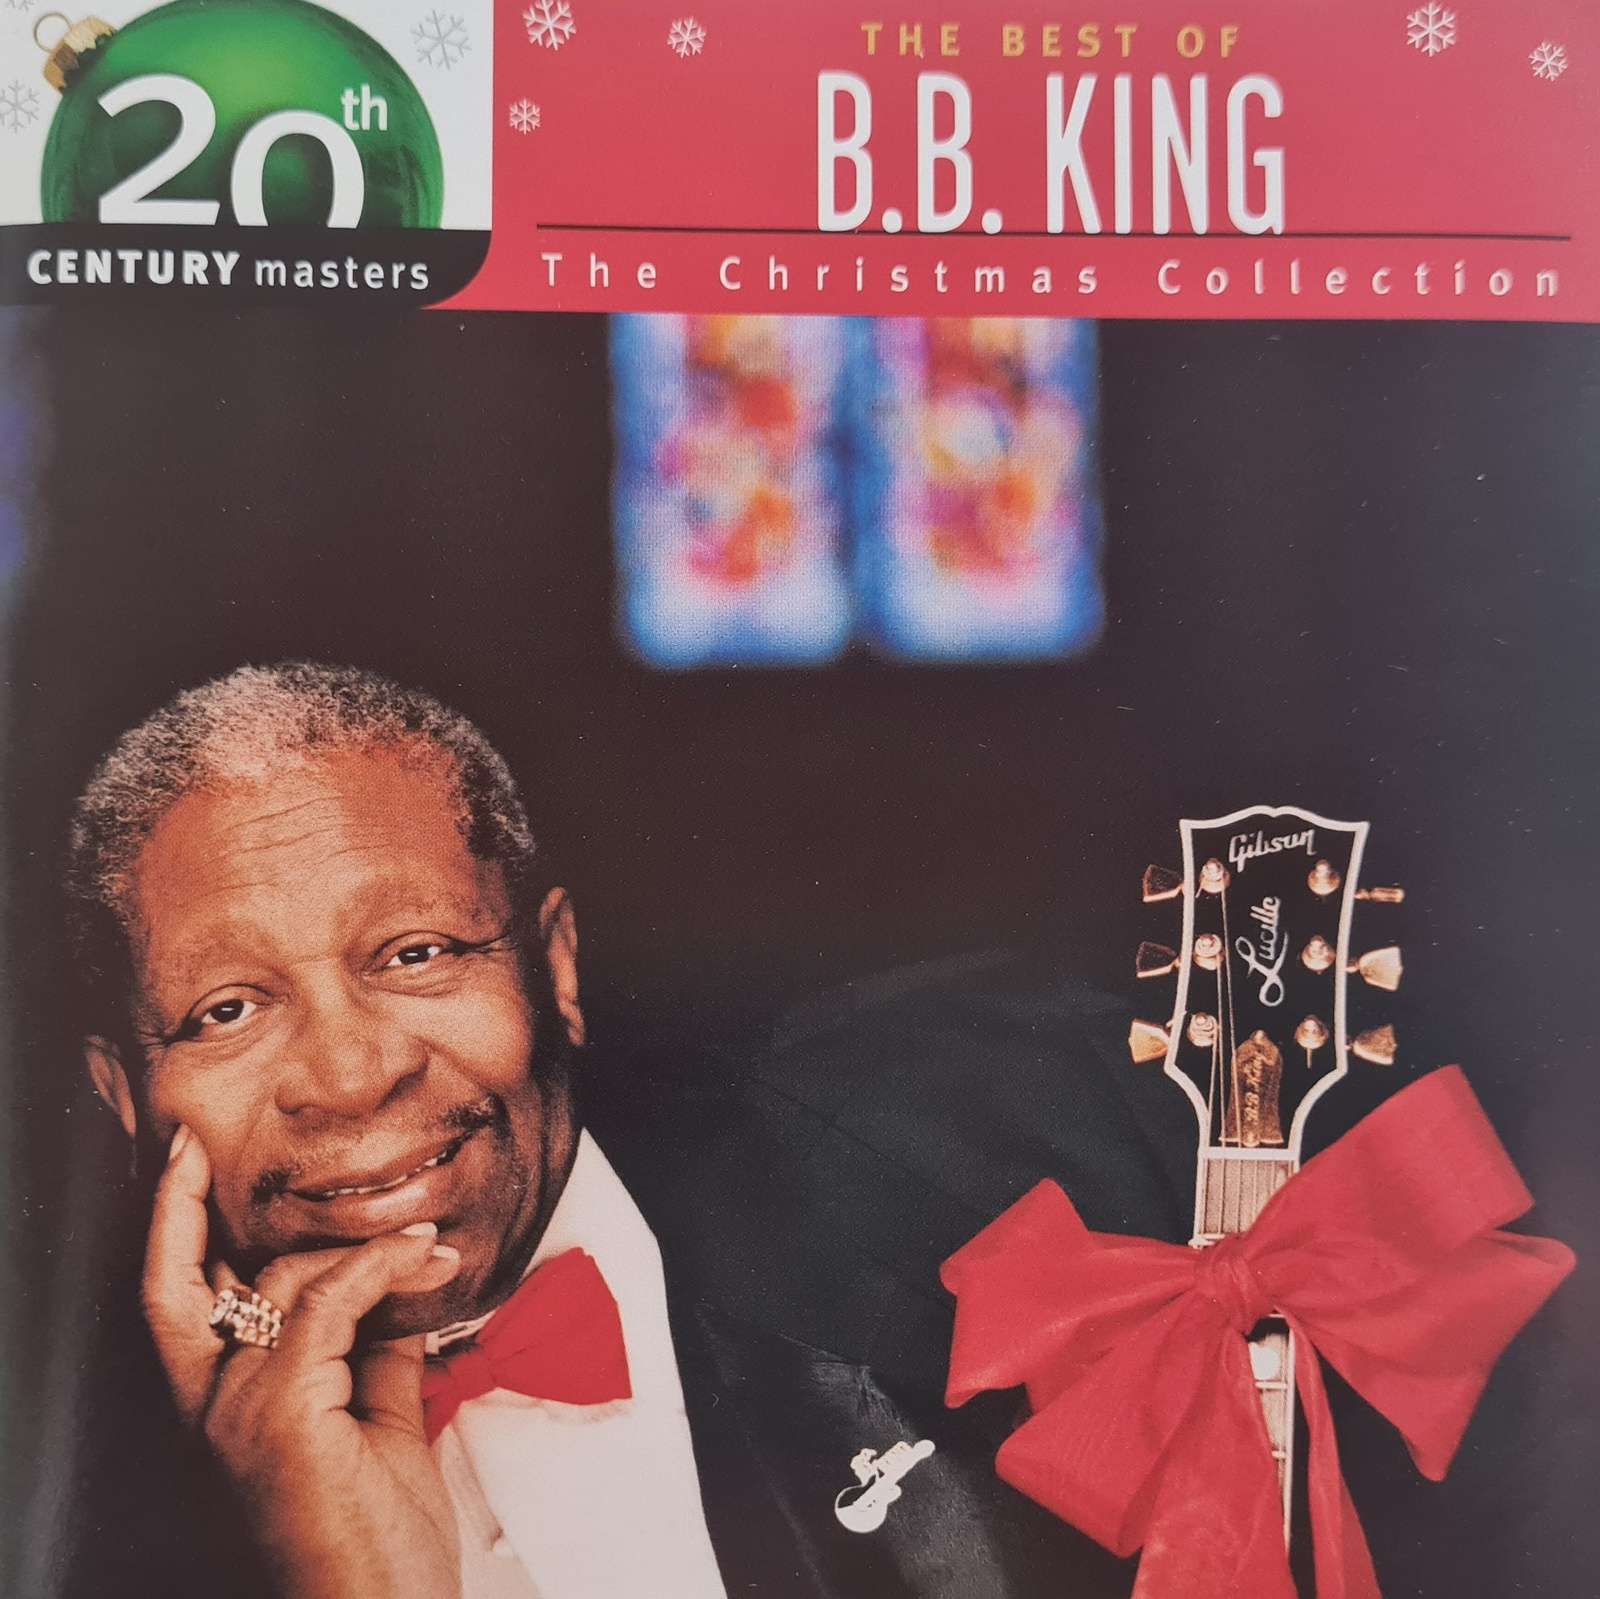 B.B. King  - The Best of B.B. King the Christmas Collection (CD)